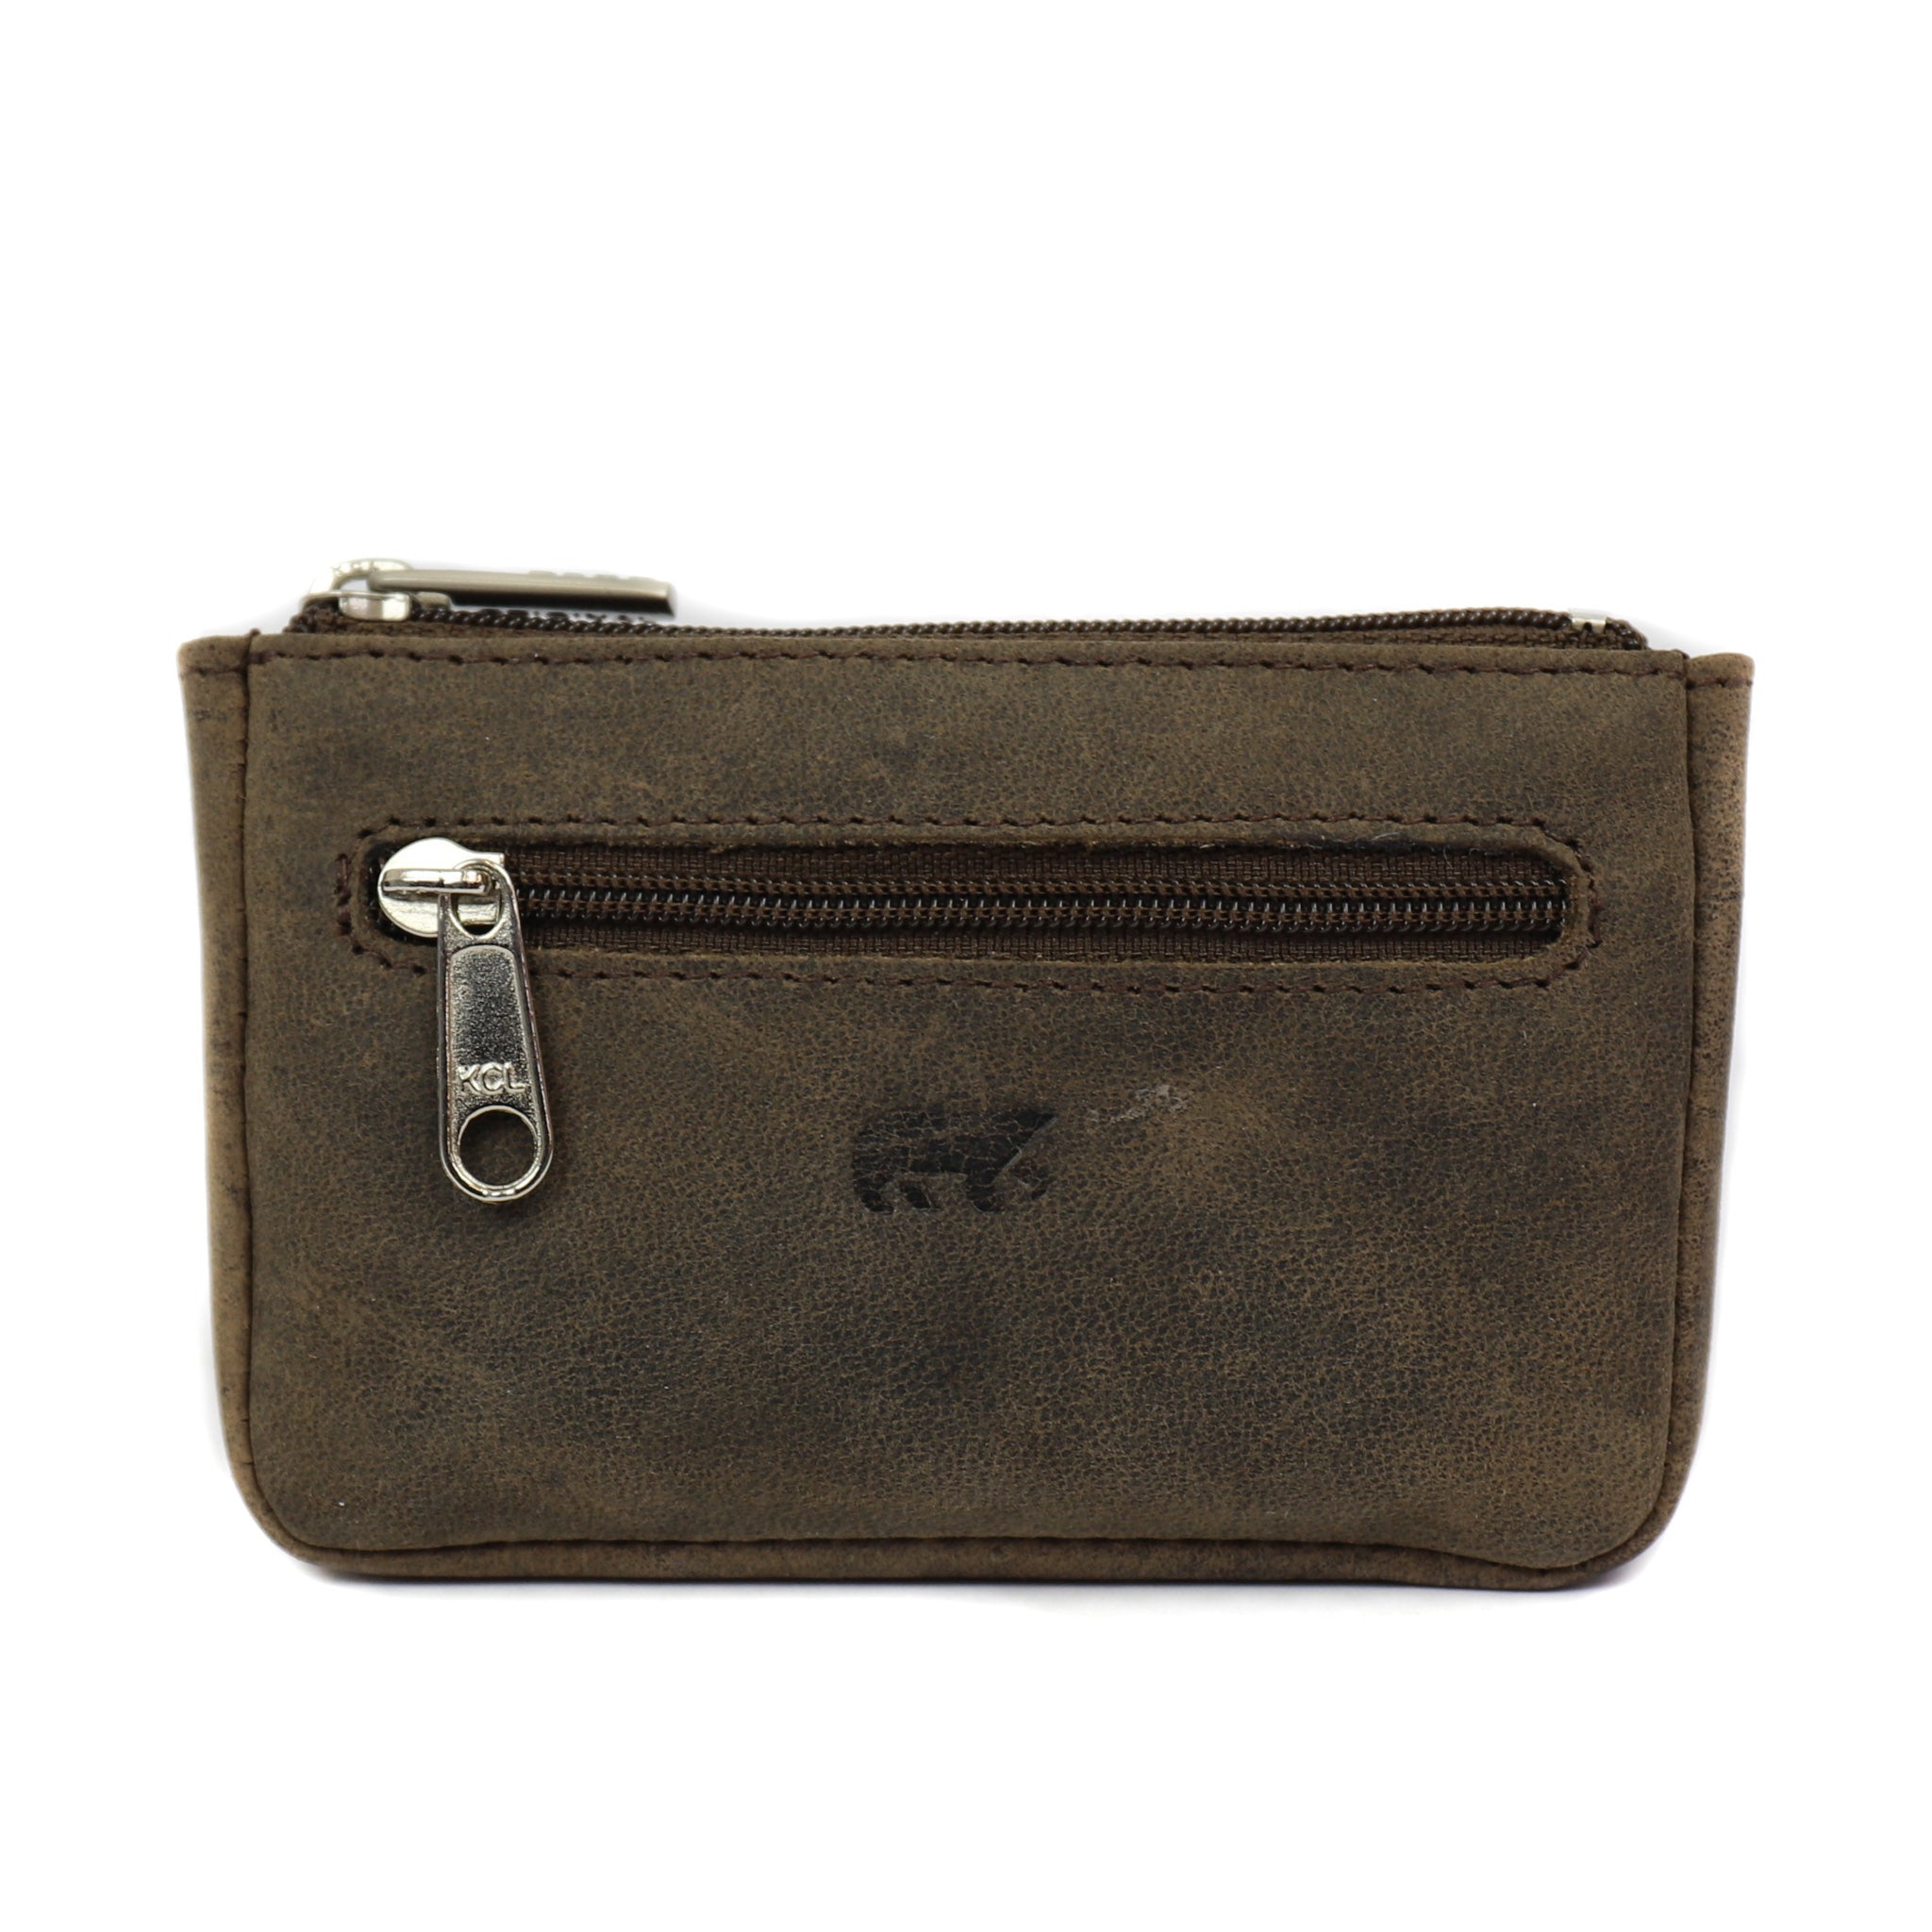 Key pouch 'Timo' brown